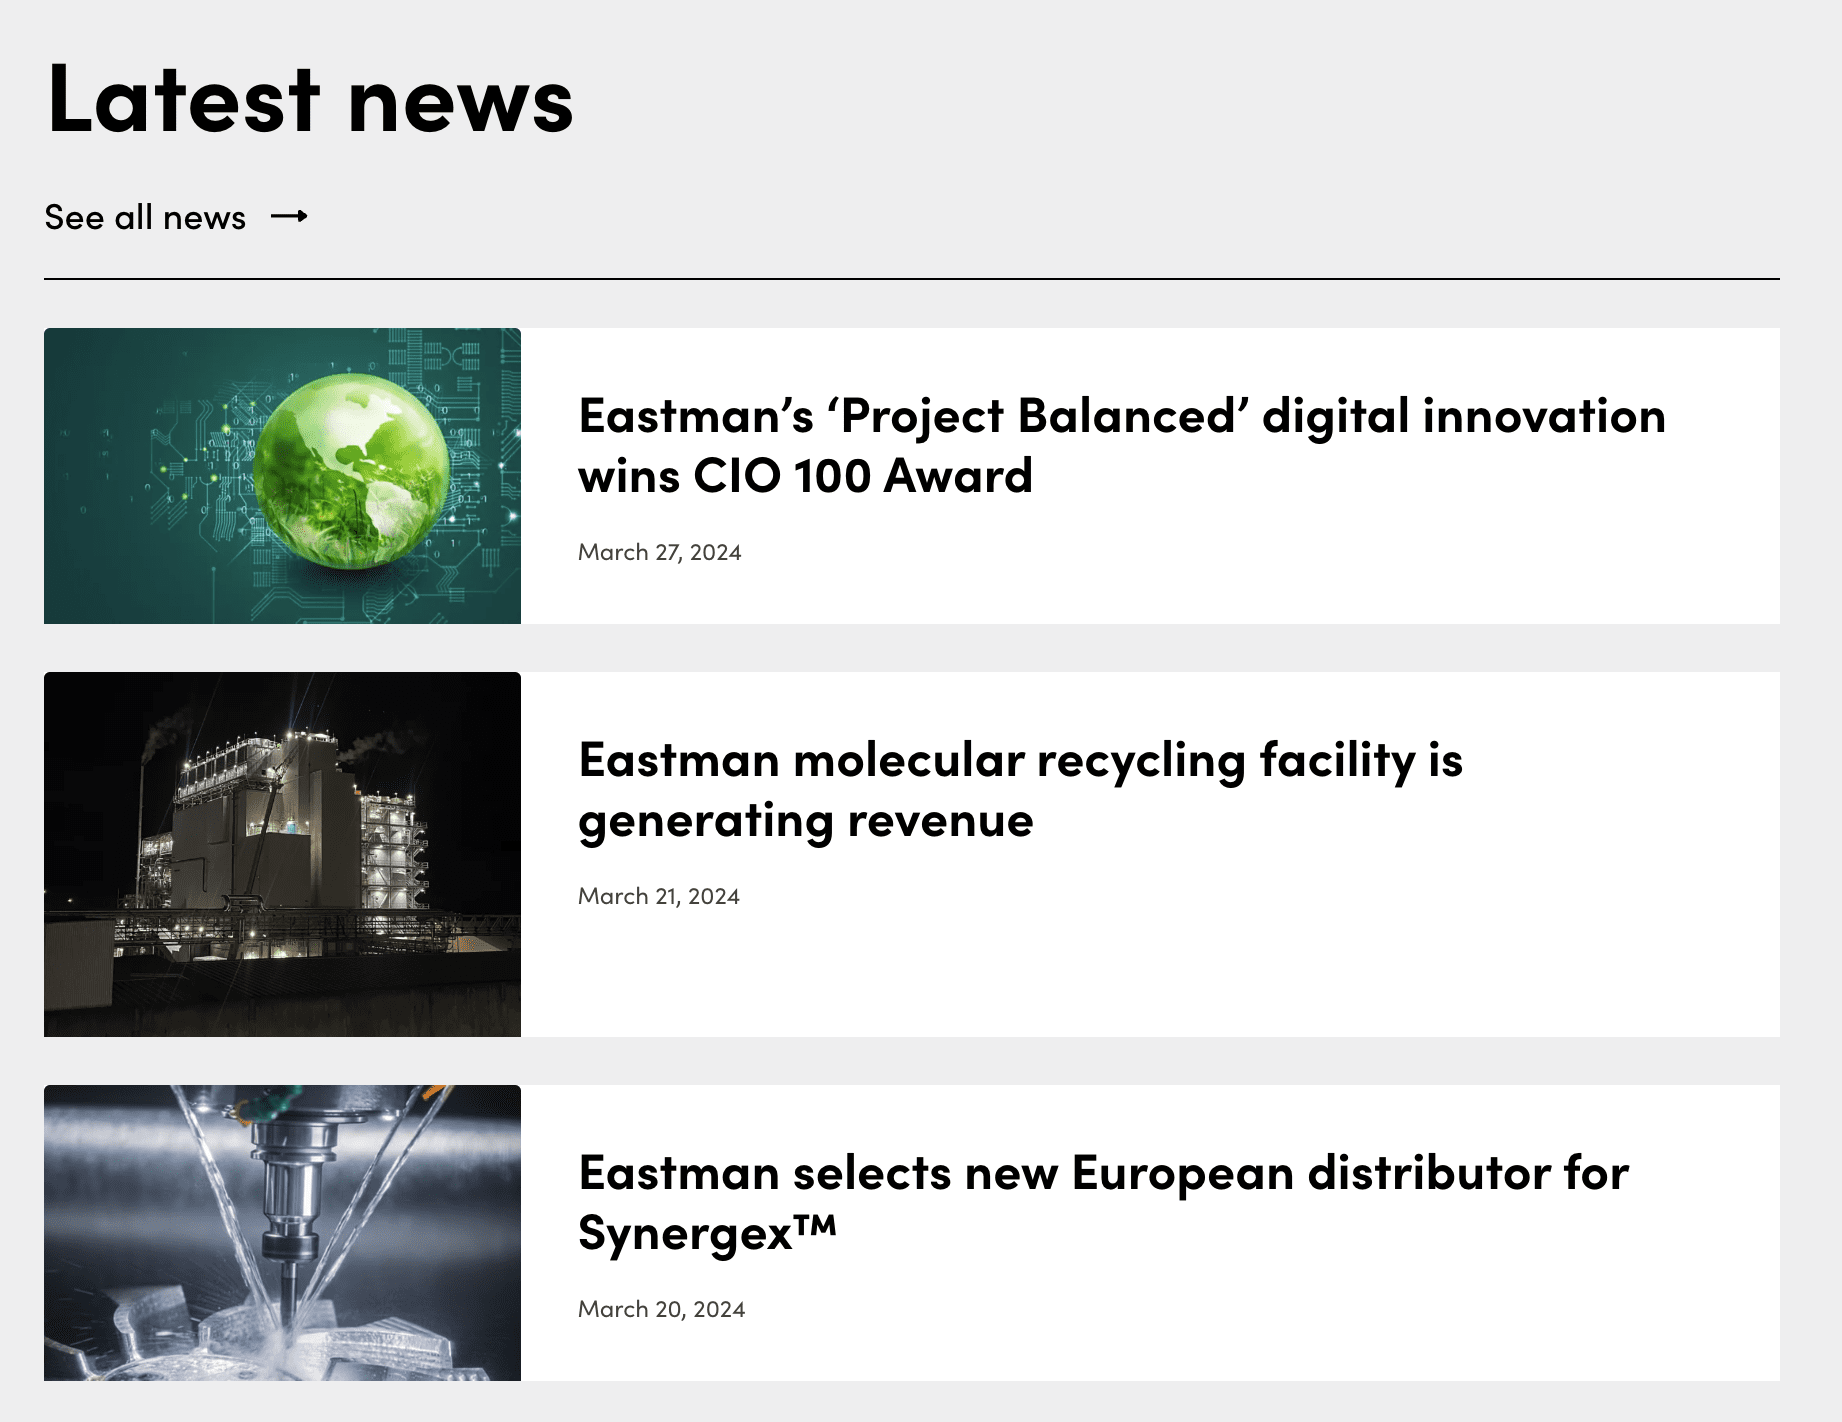 Three news article thumbnails: top depicts earth in green, middle shows an industrial recycling facility at night, bottom displays machinery in a high-tech setting.